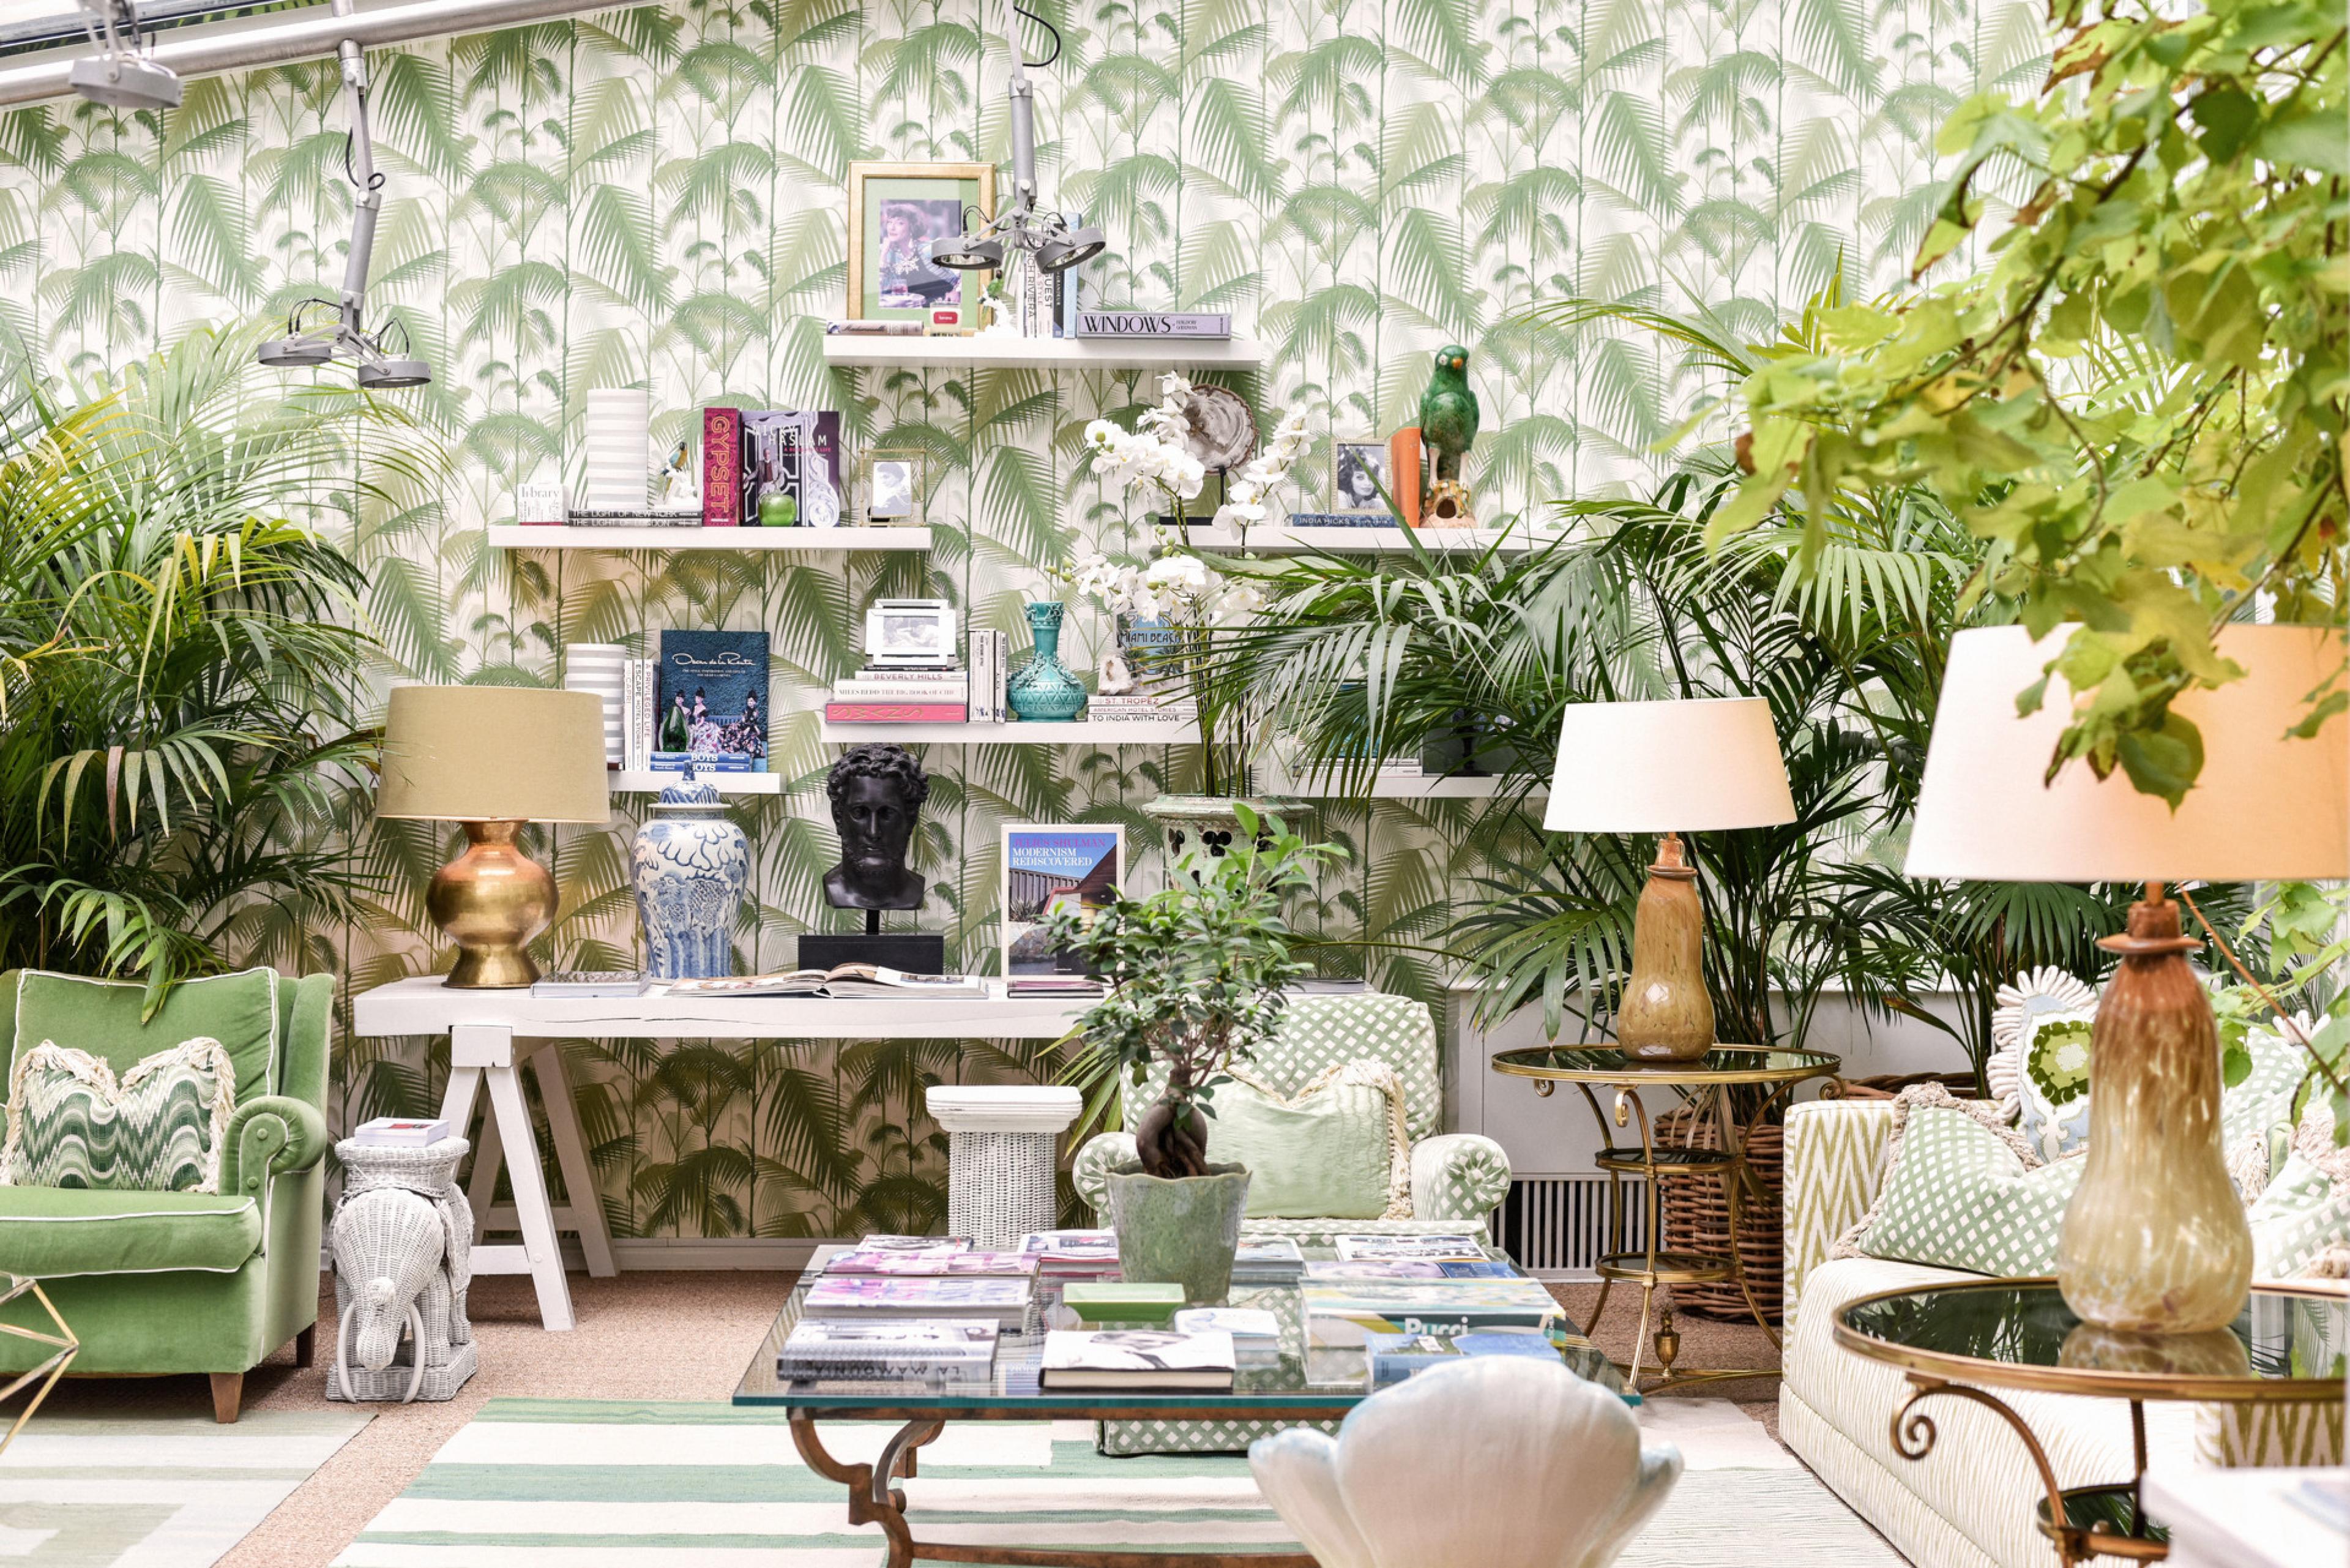 lounge with plant wallpaper, lots of plants and white shelves with whimsical decor